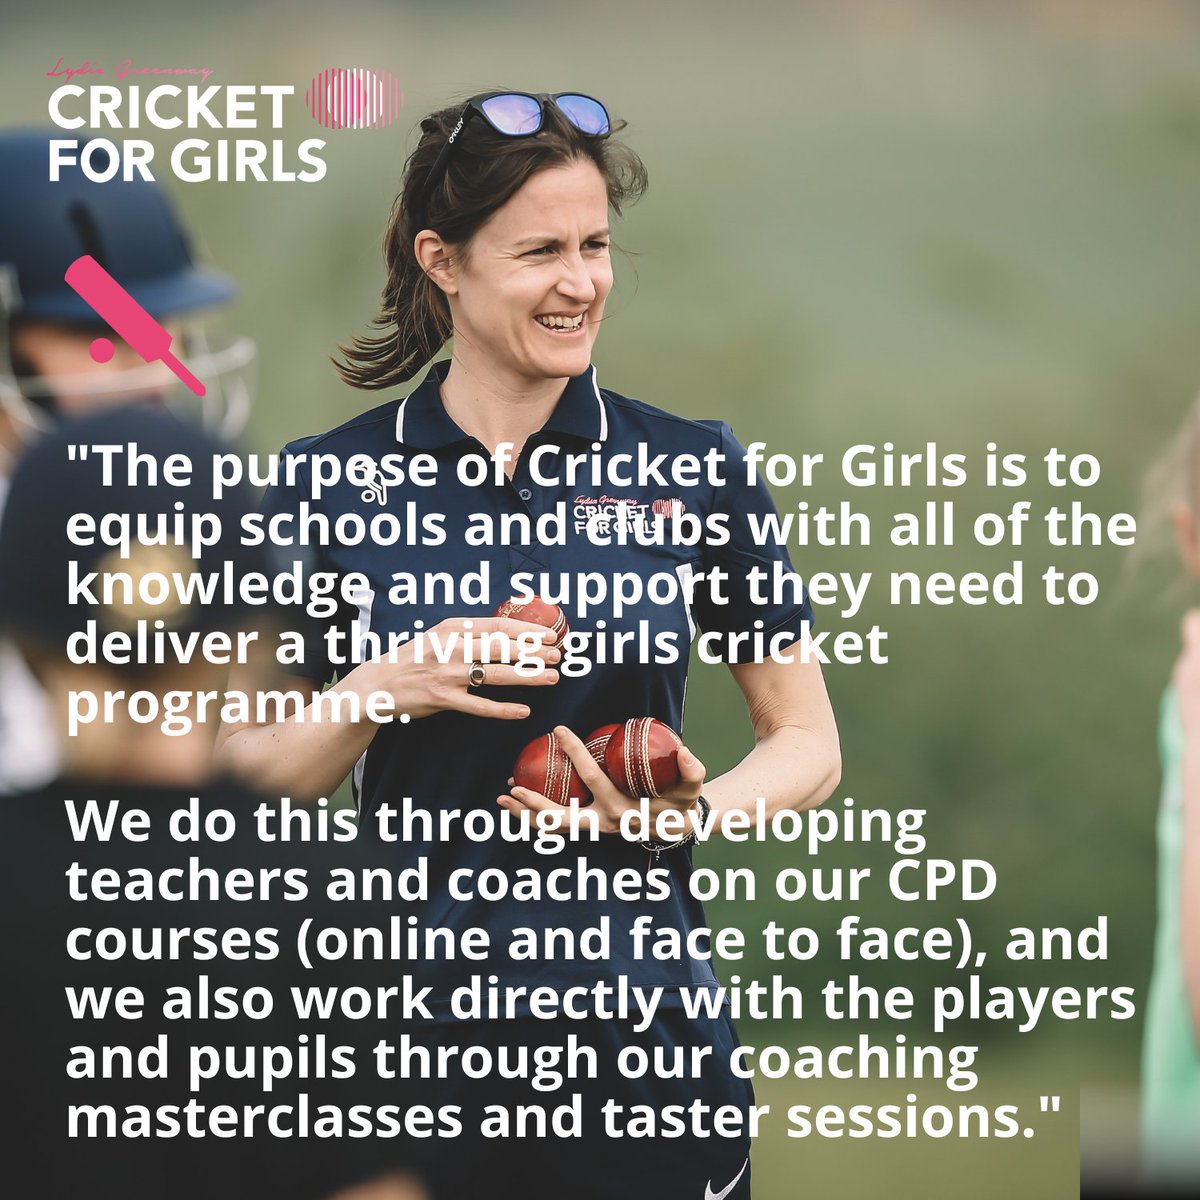 We are dedicated to empowering schools and clubs with top-notch girls cricket programs! 💪 Our focus: 1️⃣ Training teachers and coaches with CPD Courses led by Lydia Greenway OBE. 2️⃣ Inspiring players with taster sessions, masterclasses, and more! ow.ly/EMvR50R9WCm